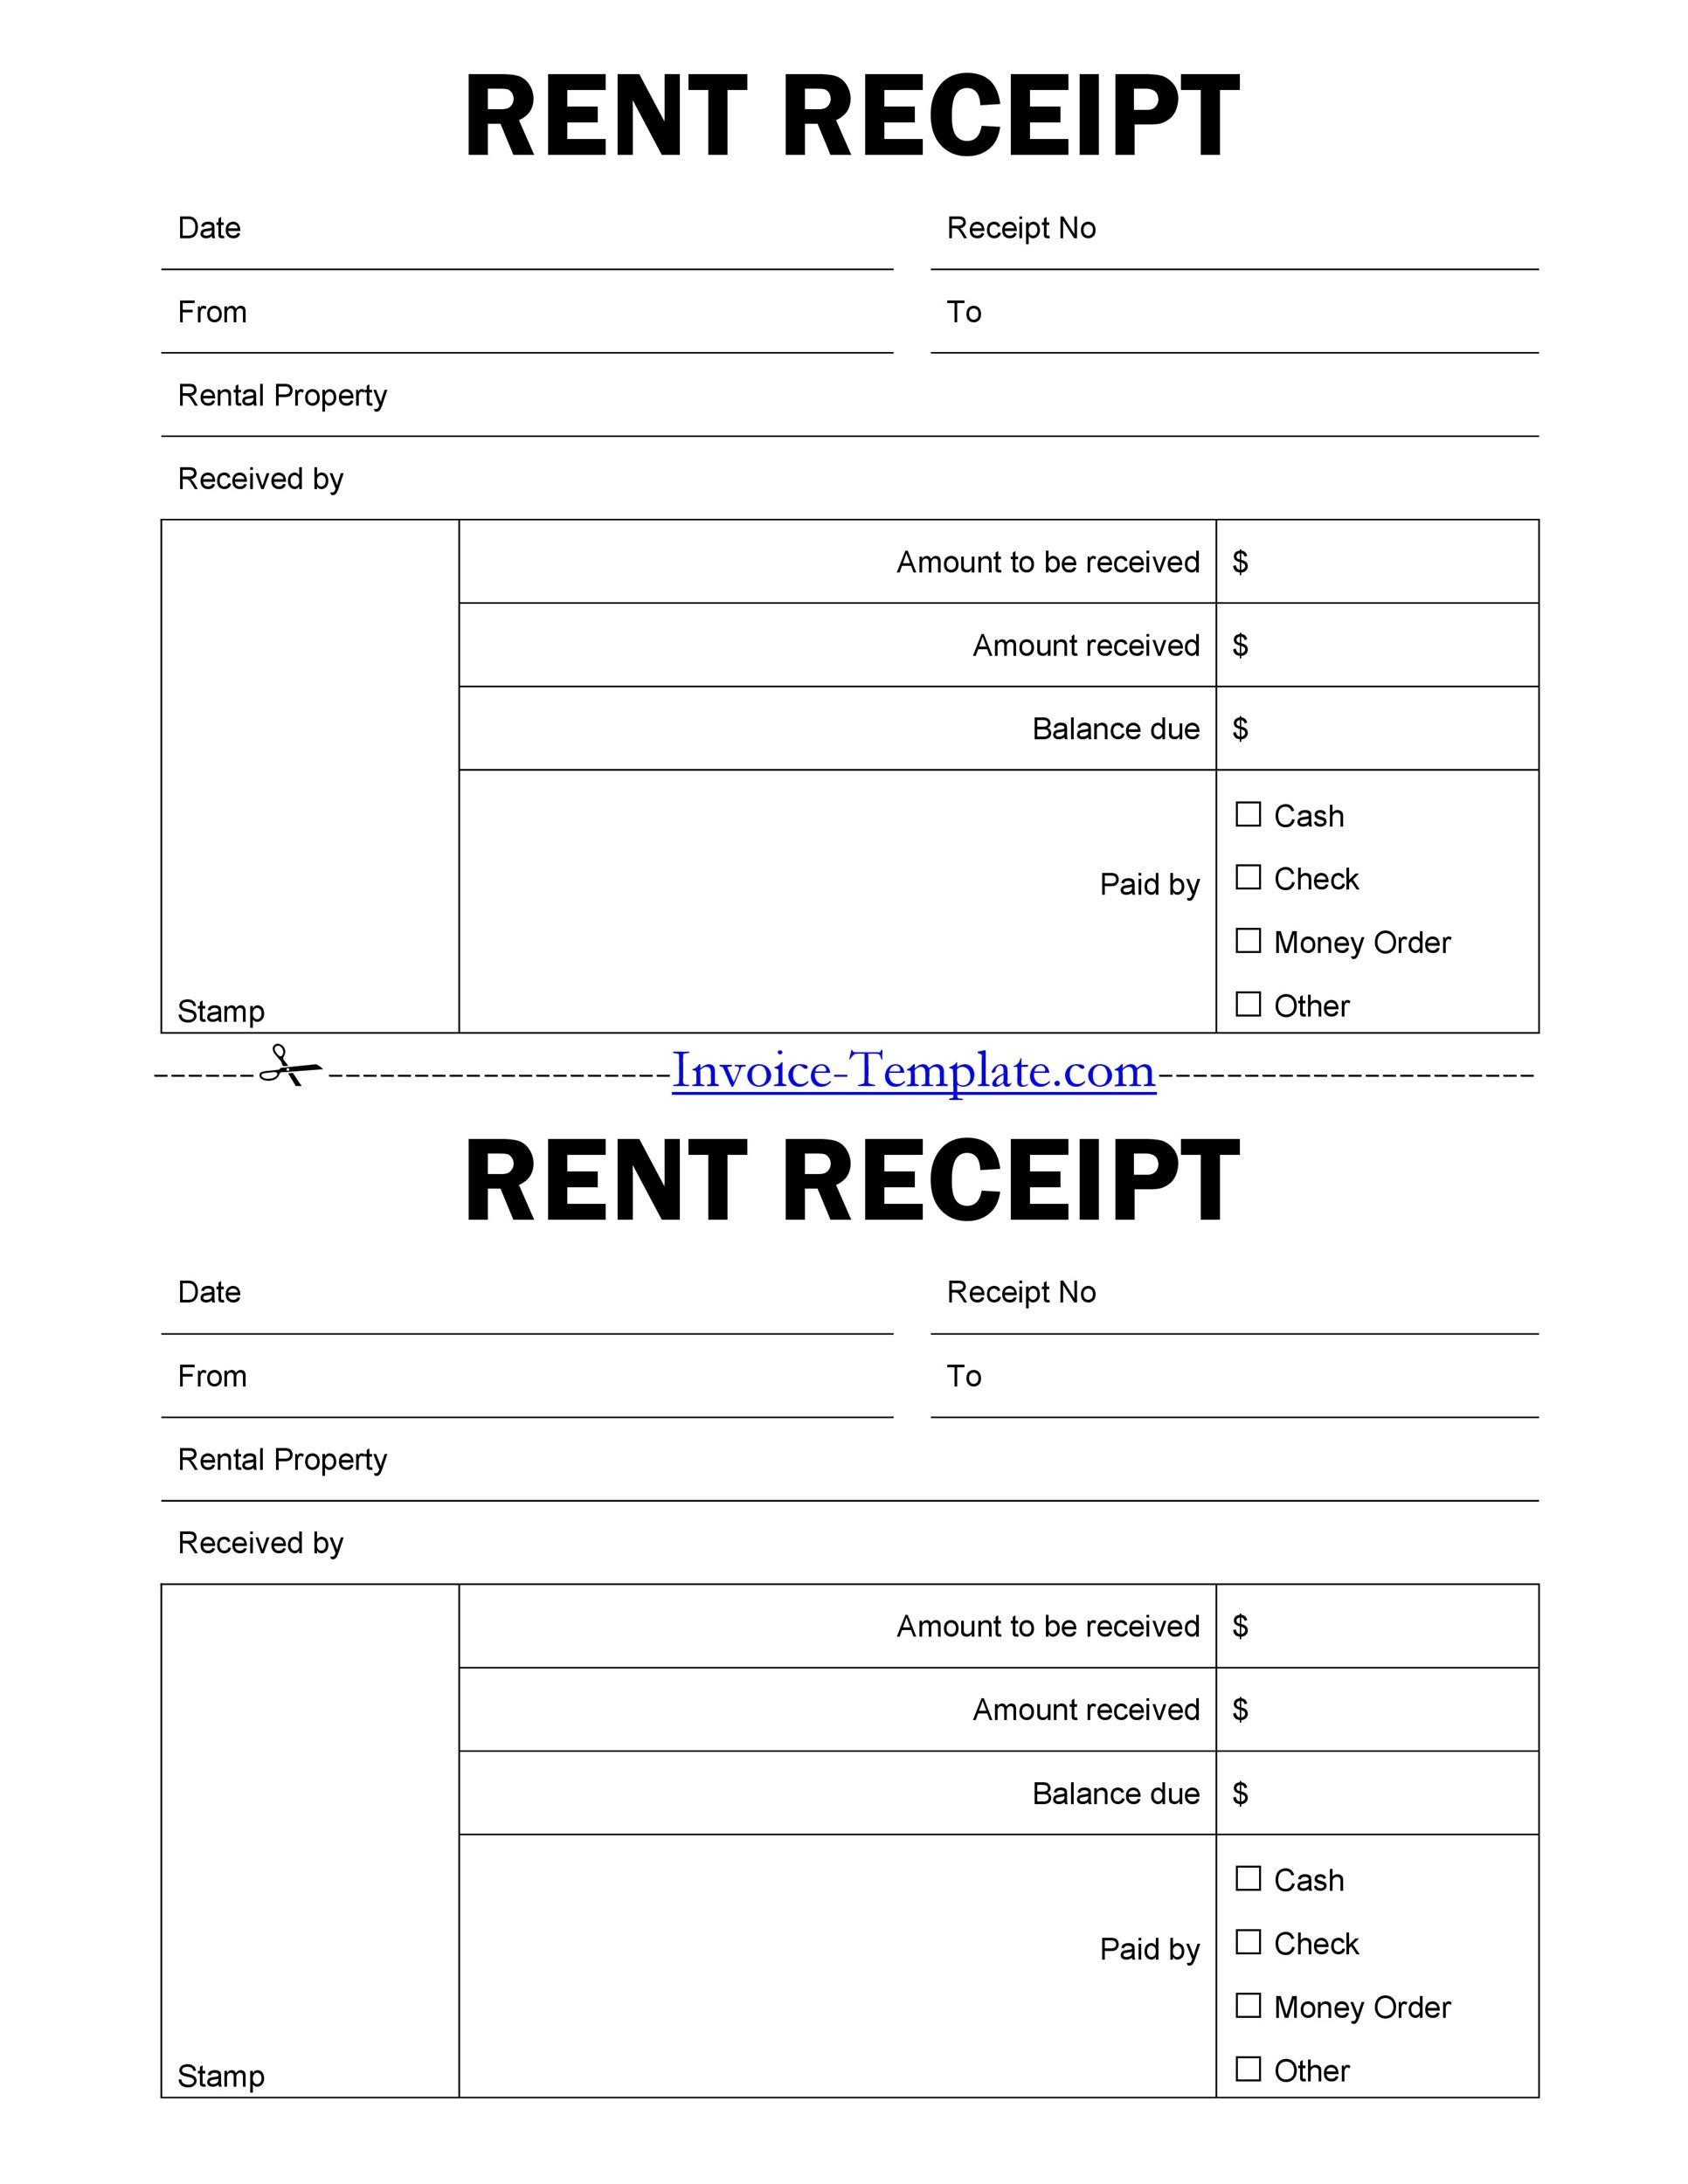 free-rent-receipt-templates-download-or-print-rent-receipt-template-download-printable-pdf